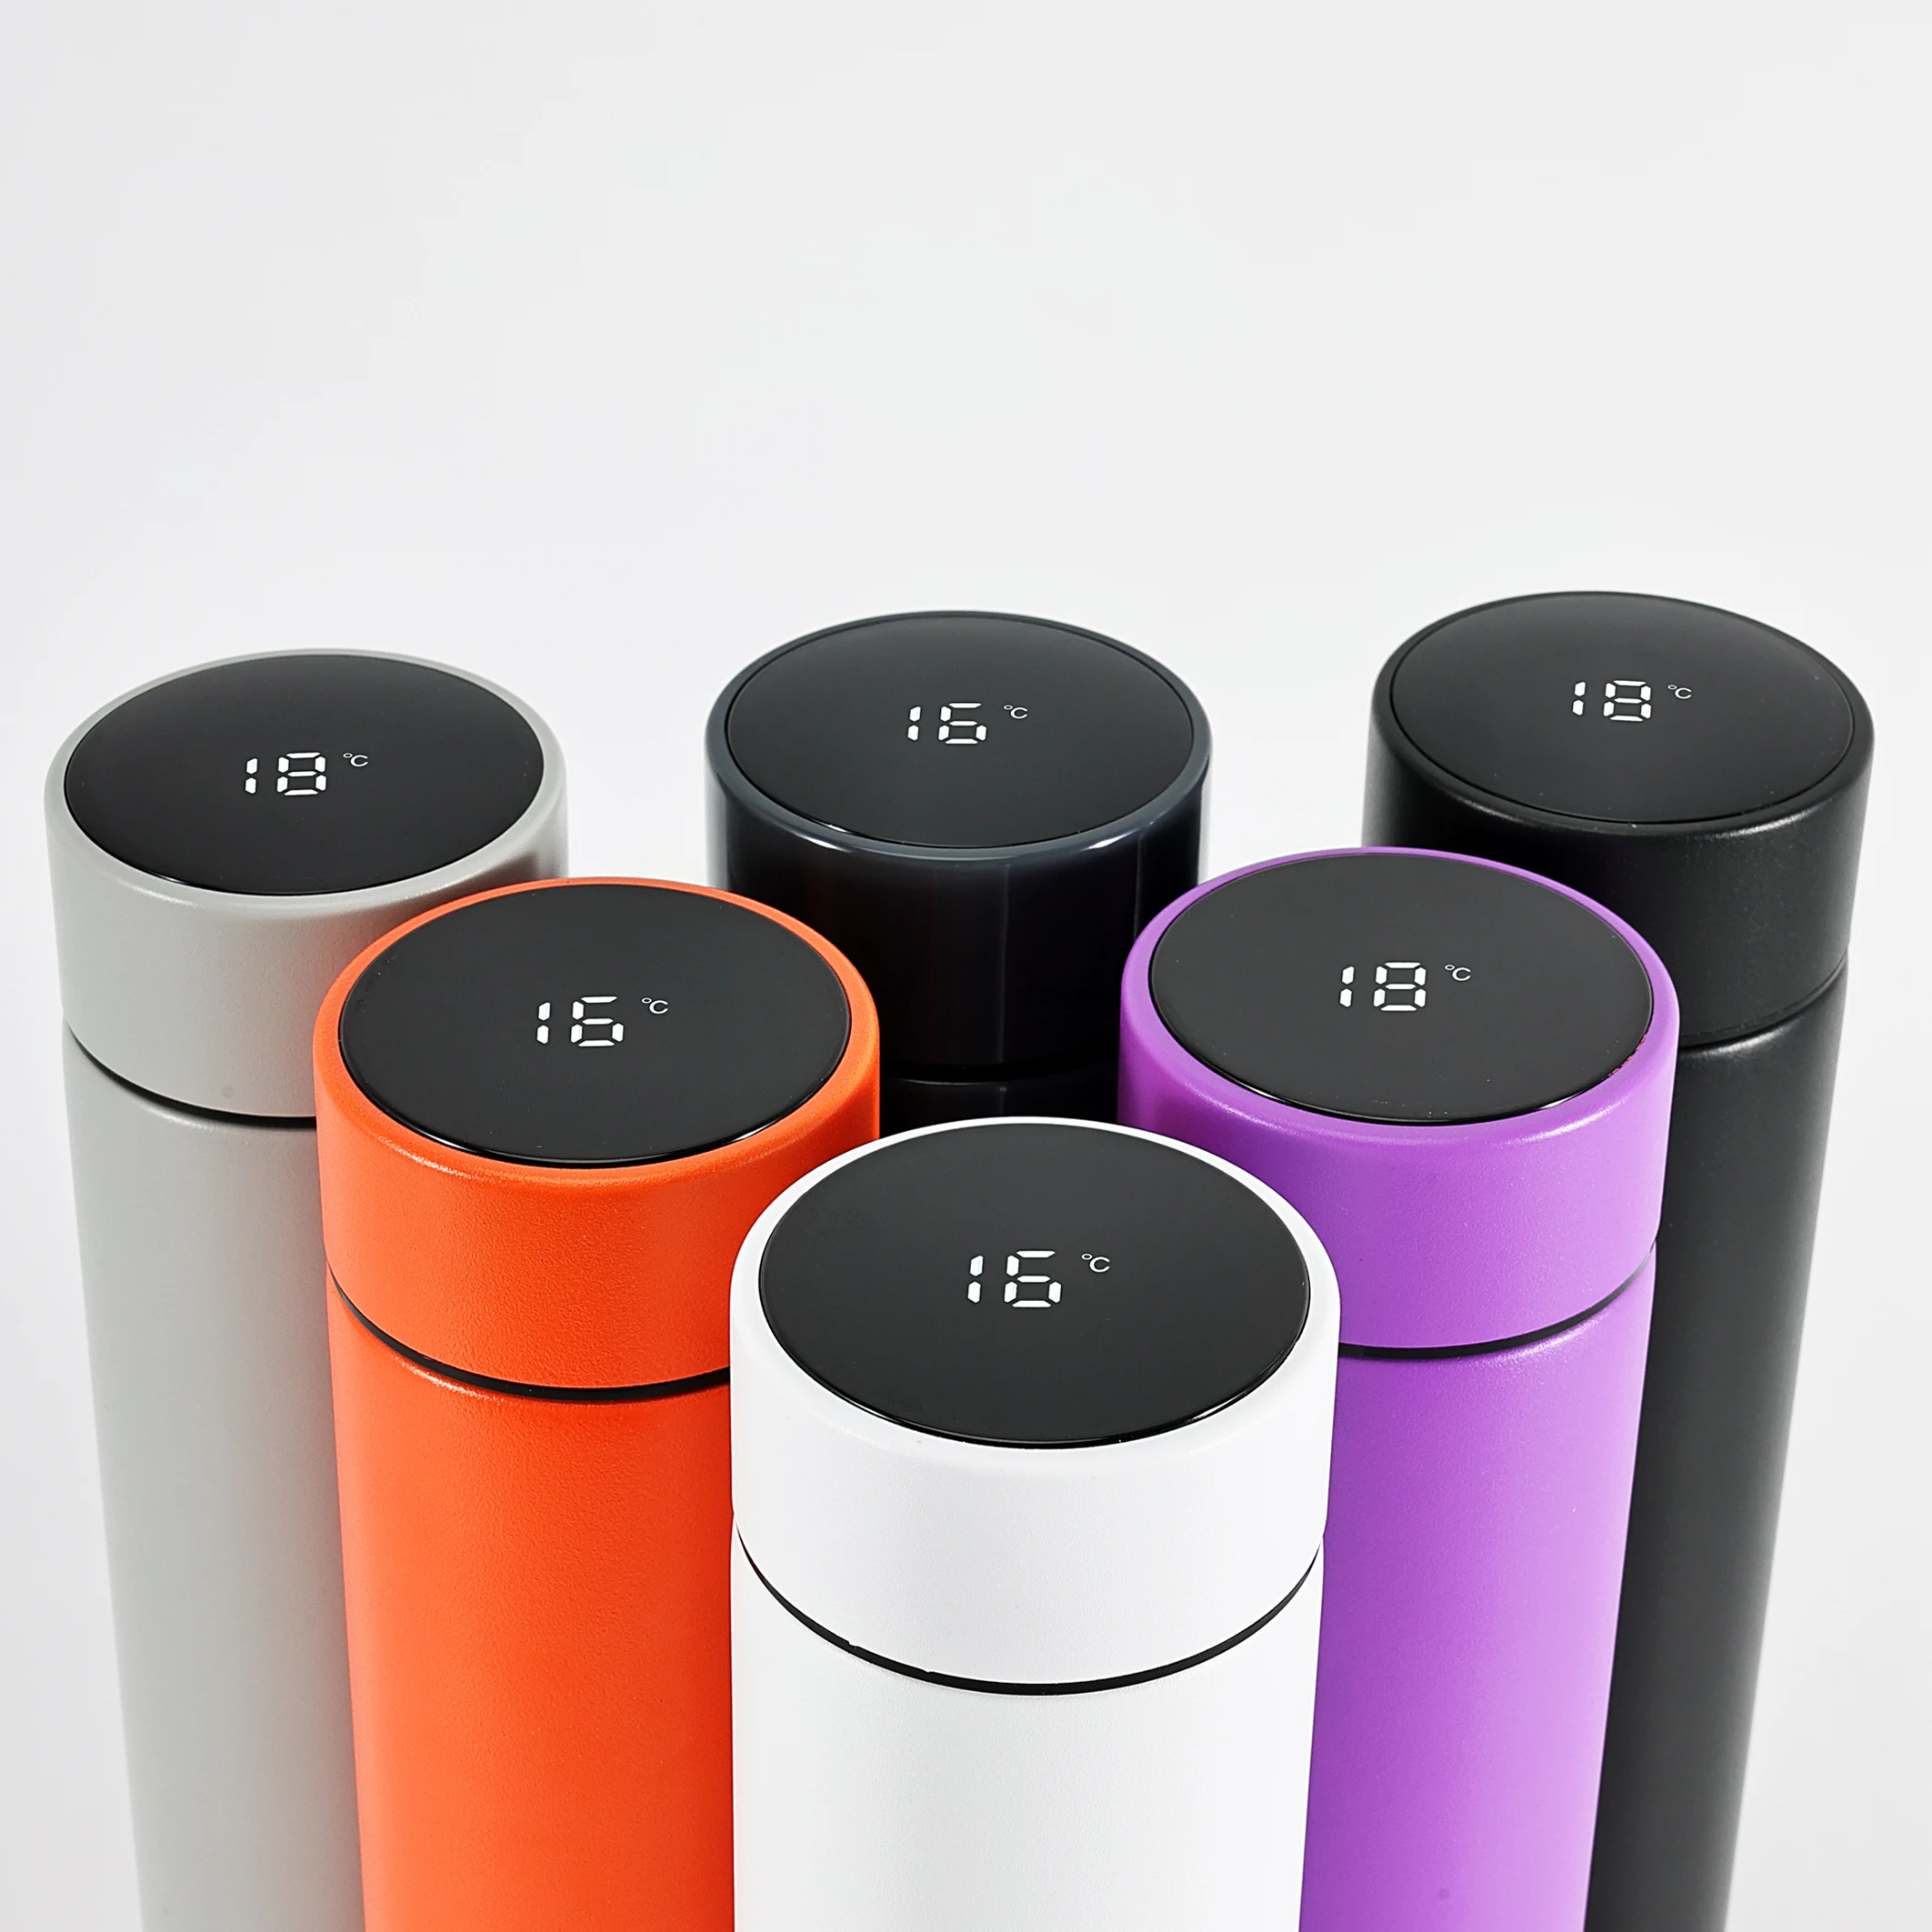 smart Insulated water bottle with led temperature display